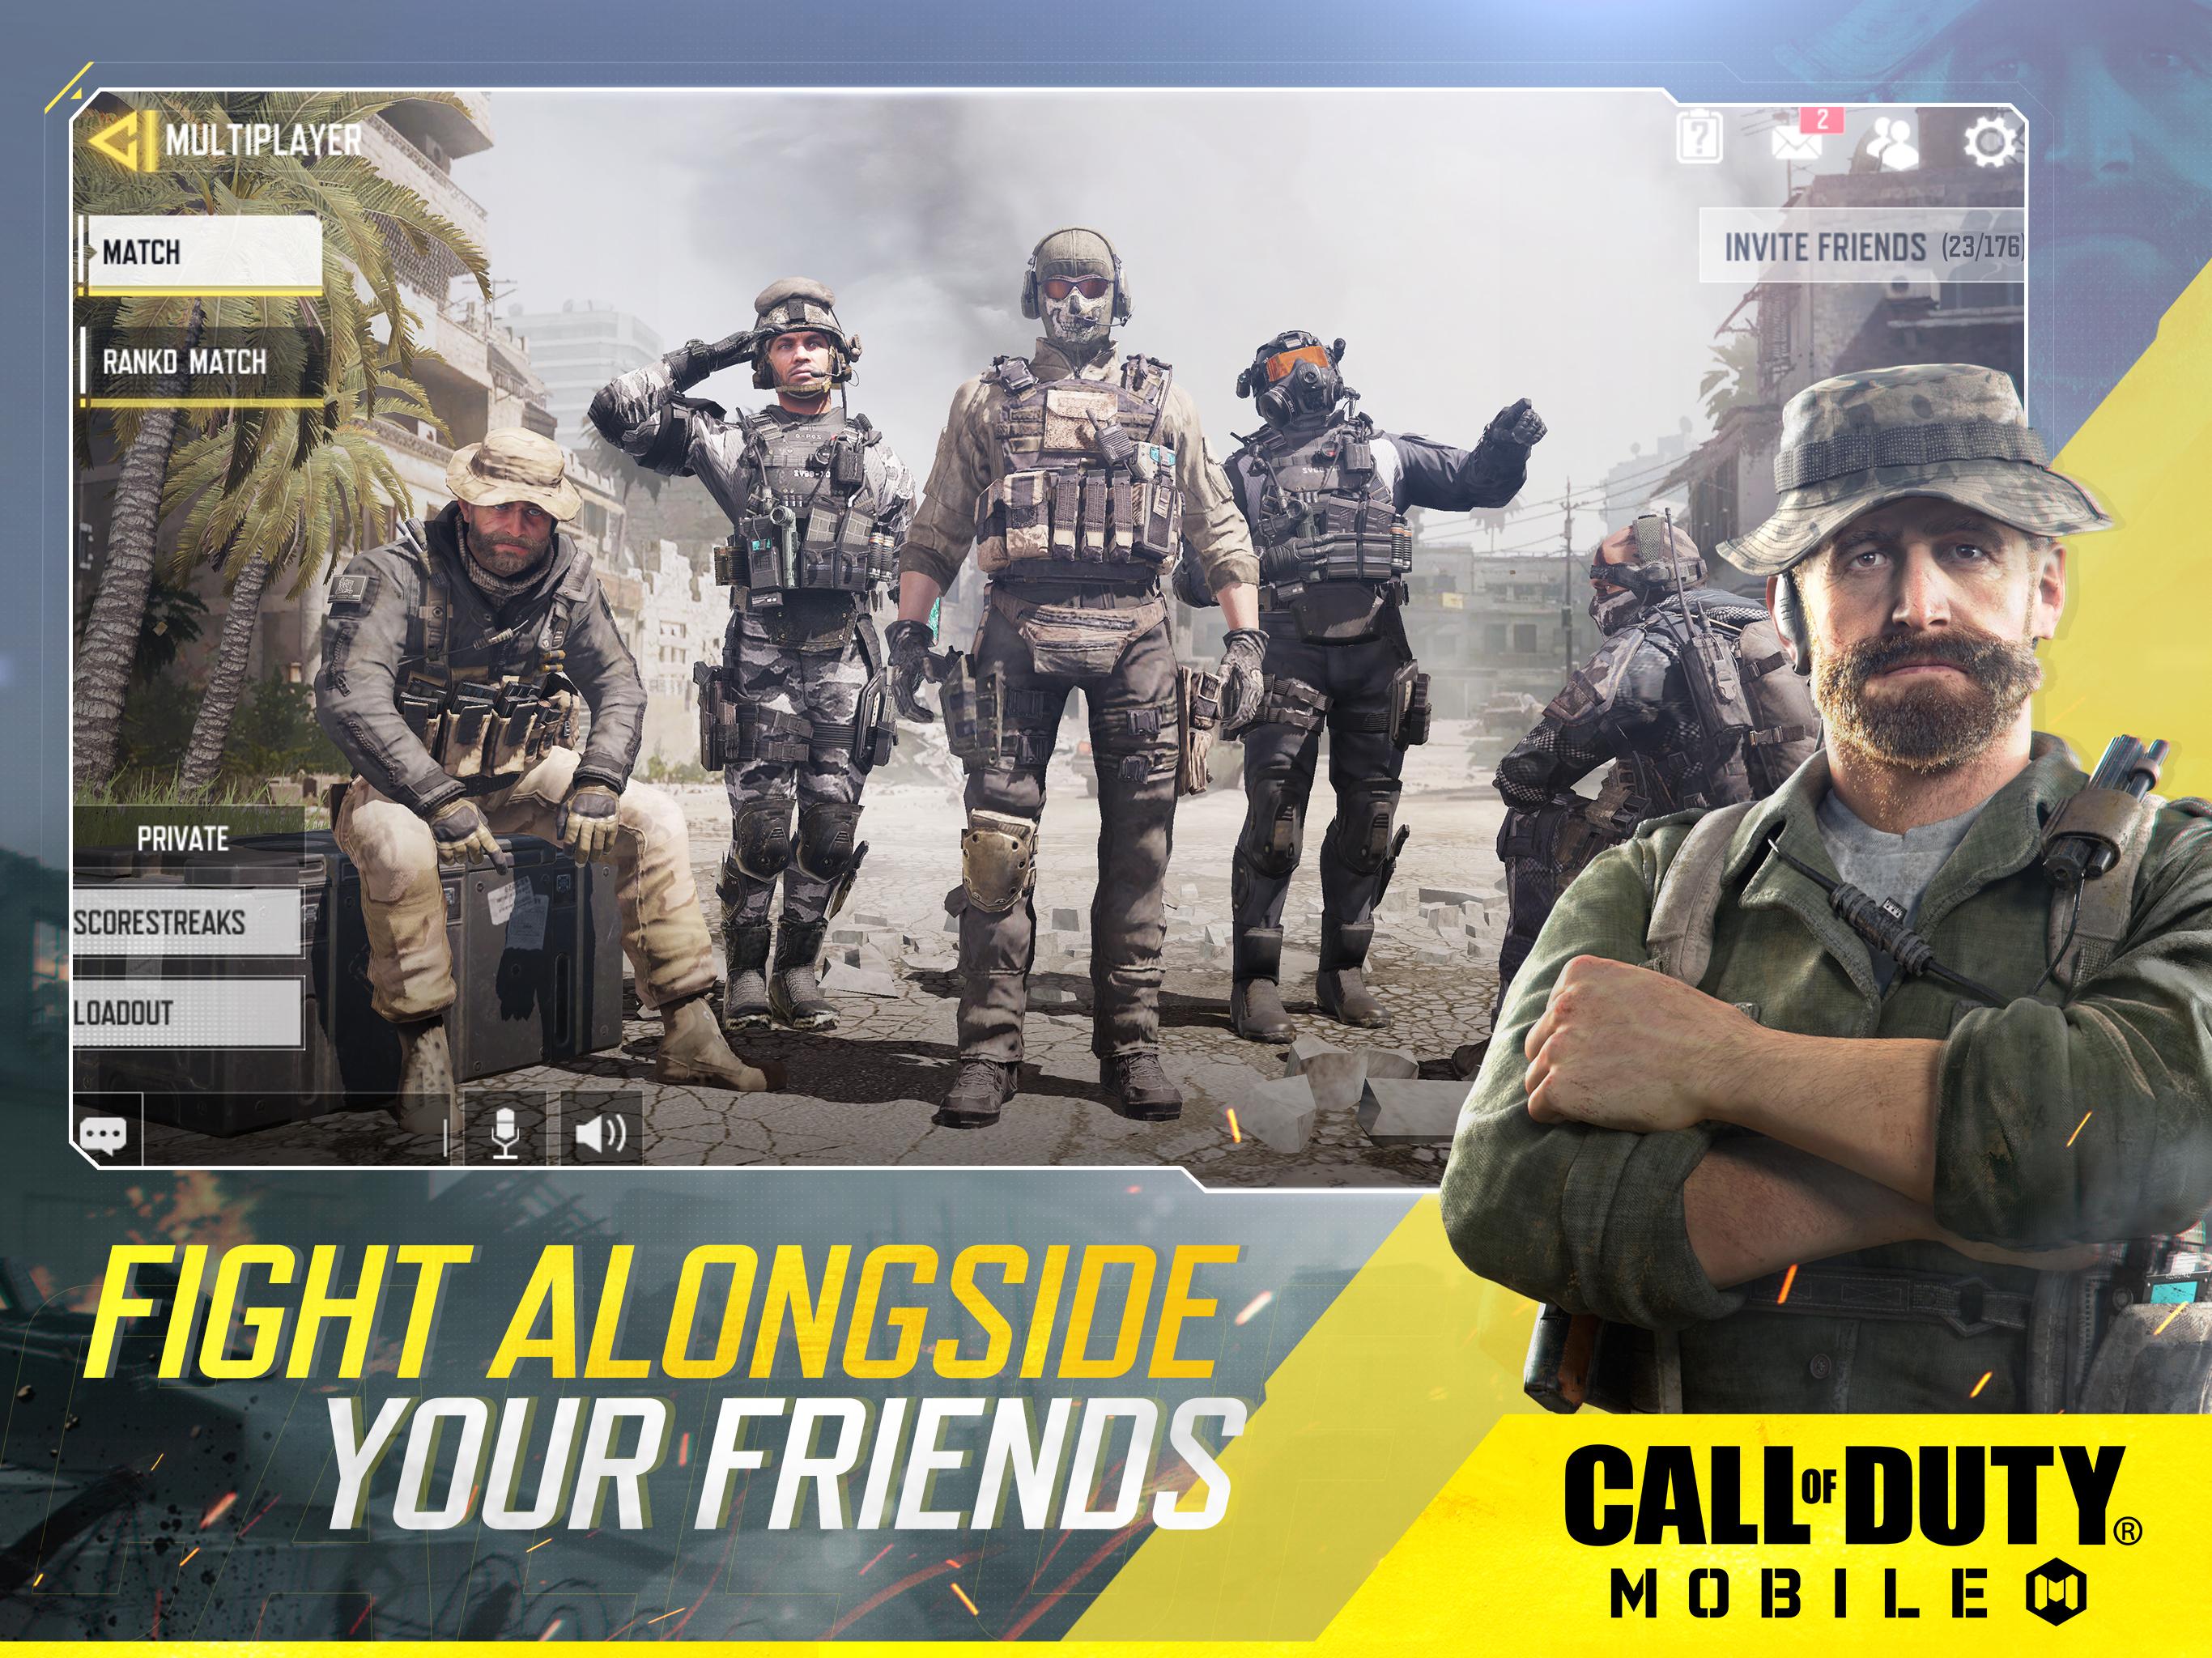 Call of DutyÂ®: Mobile - Android Games in Tap | Tap Discover ... - 